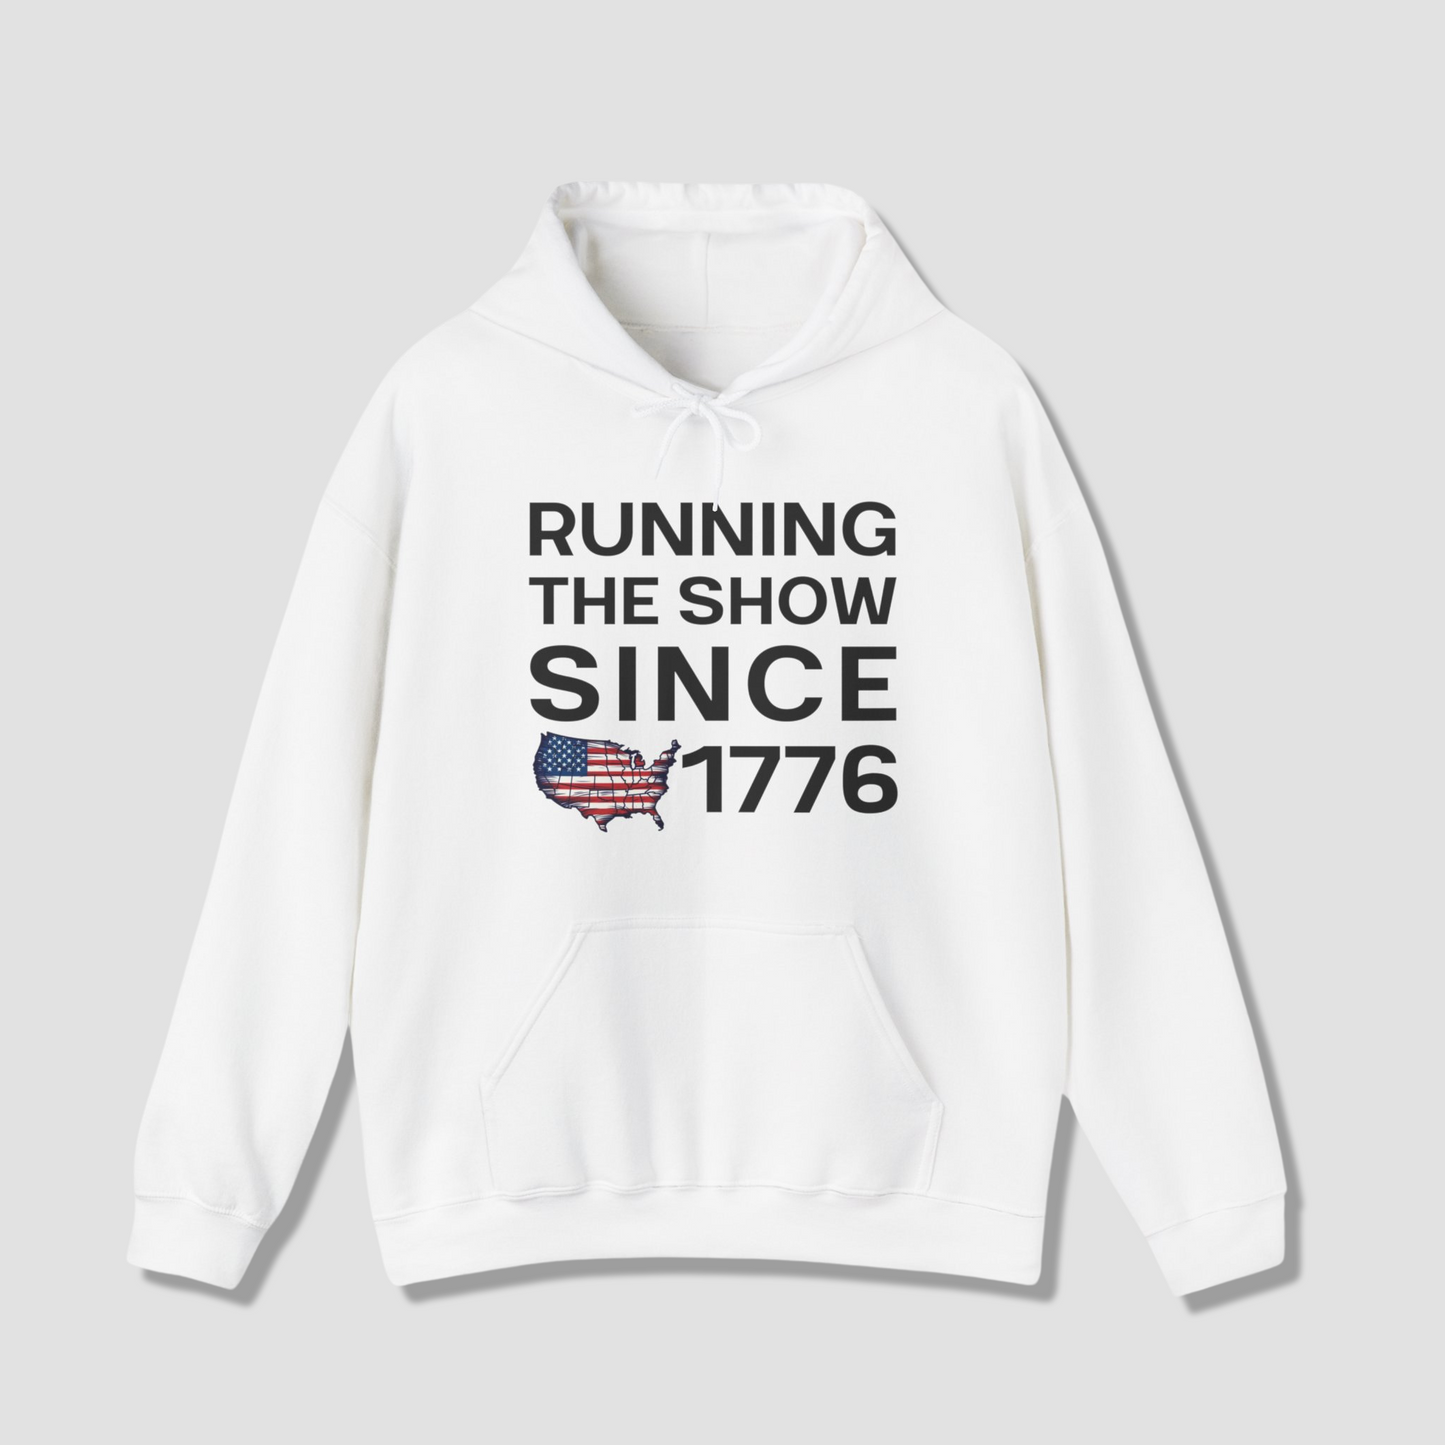 Running the Show Since 1776 Hoodie